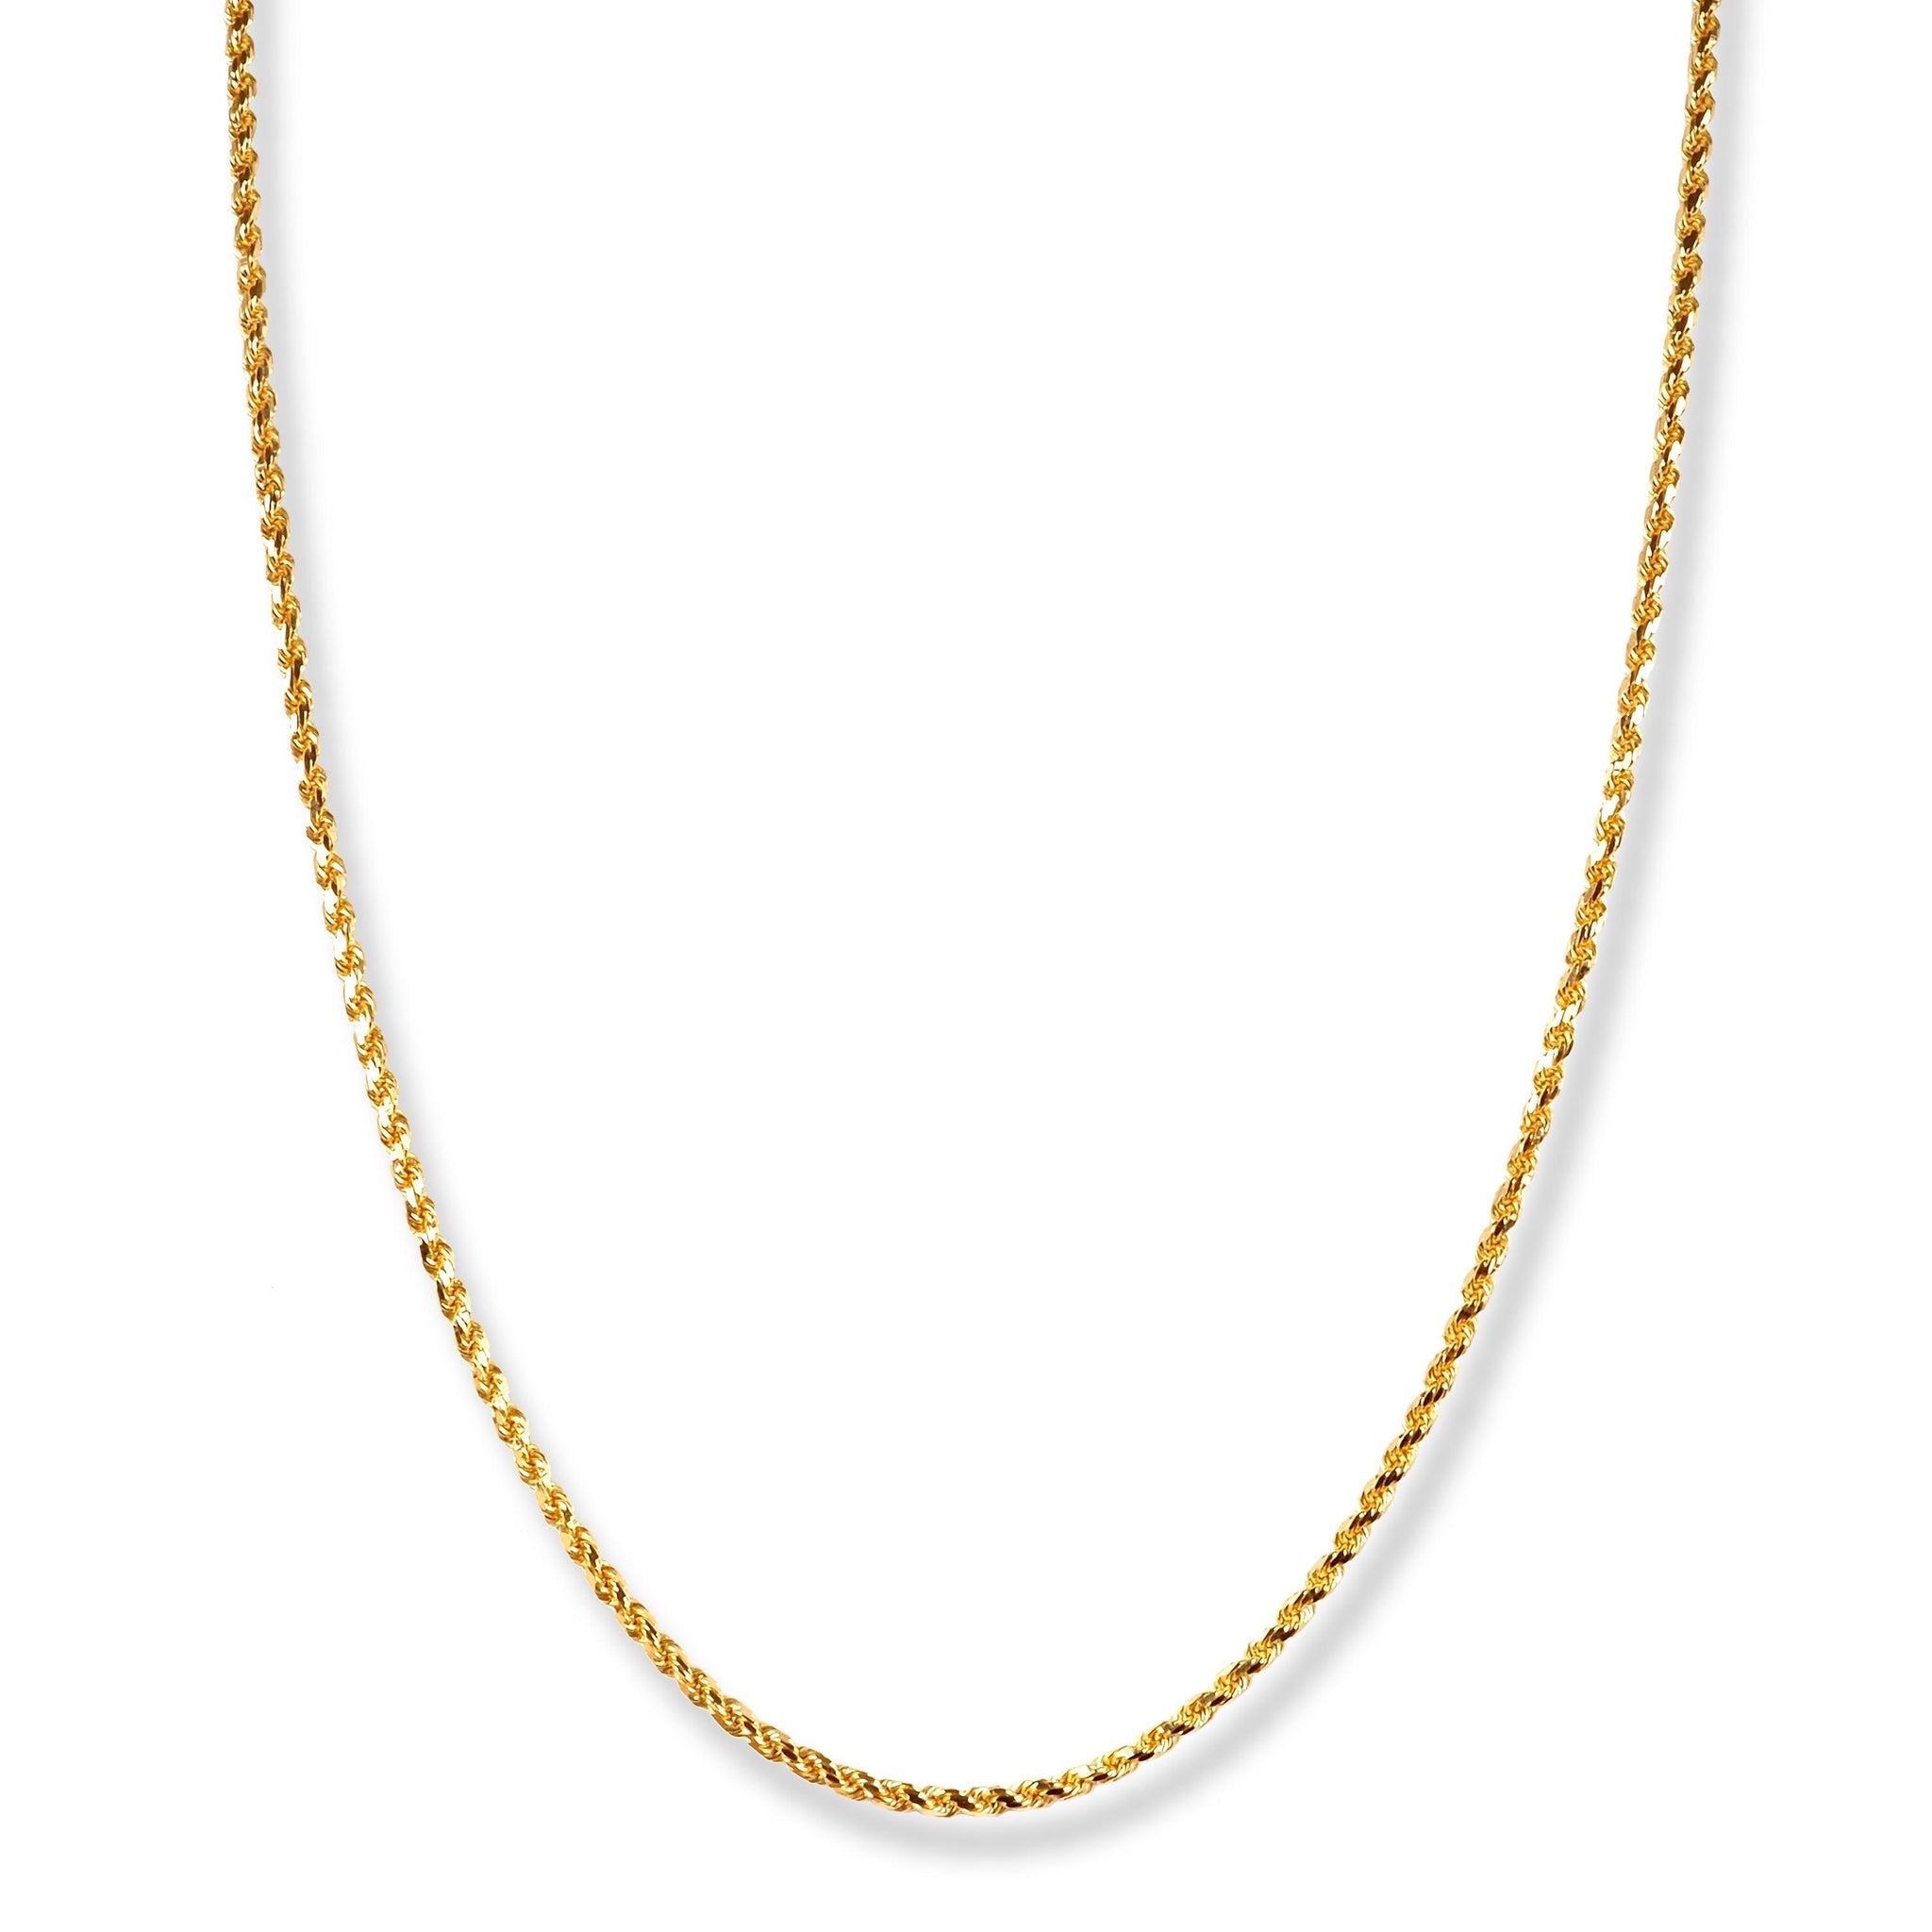 22ct Gold Filed Solid Rope Chain with S Clasp C-1216